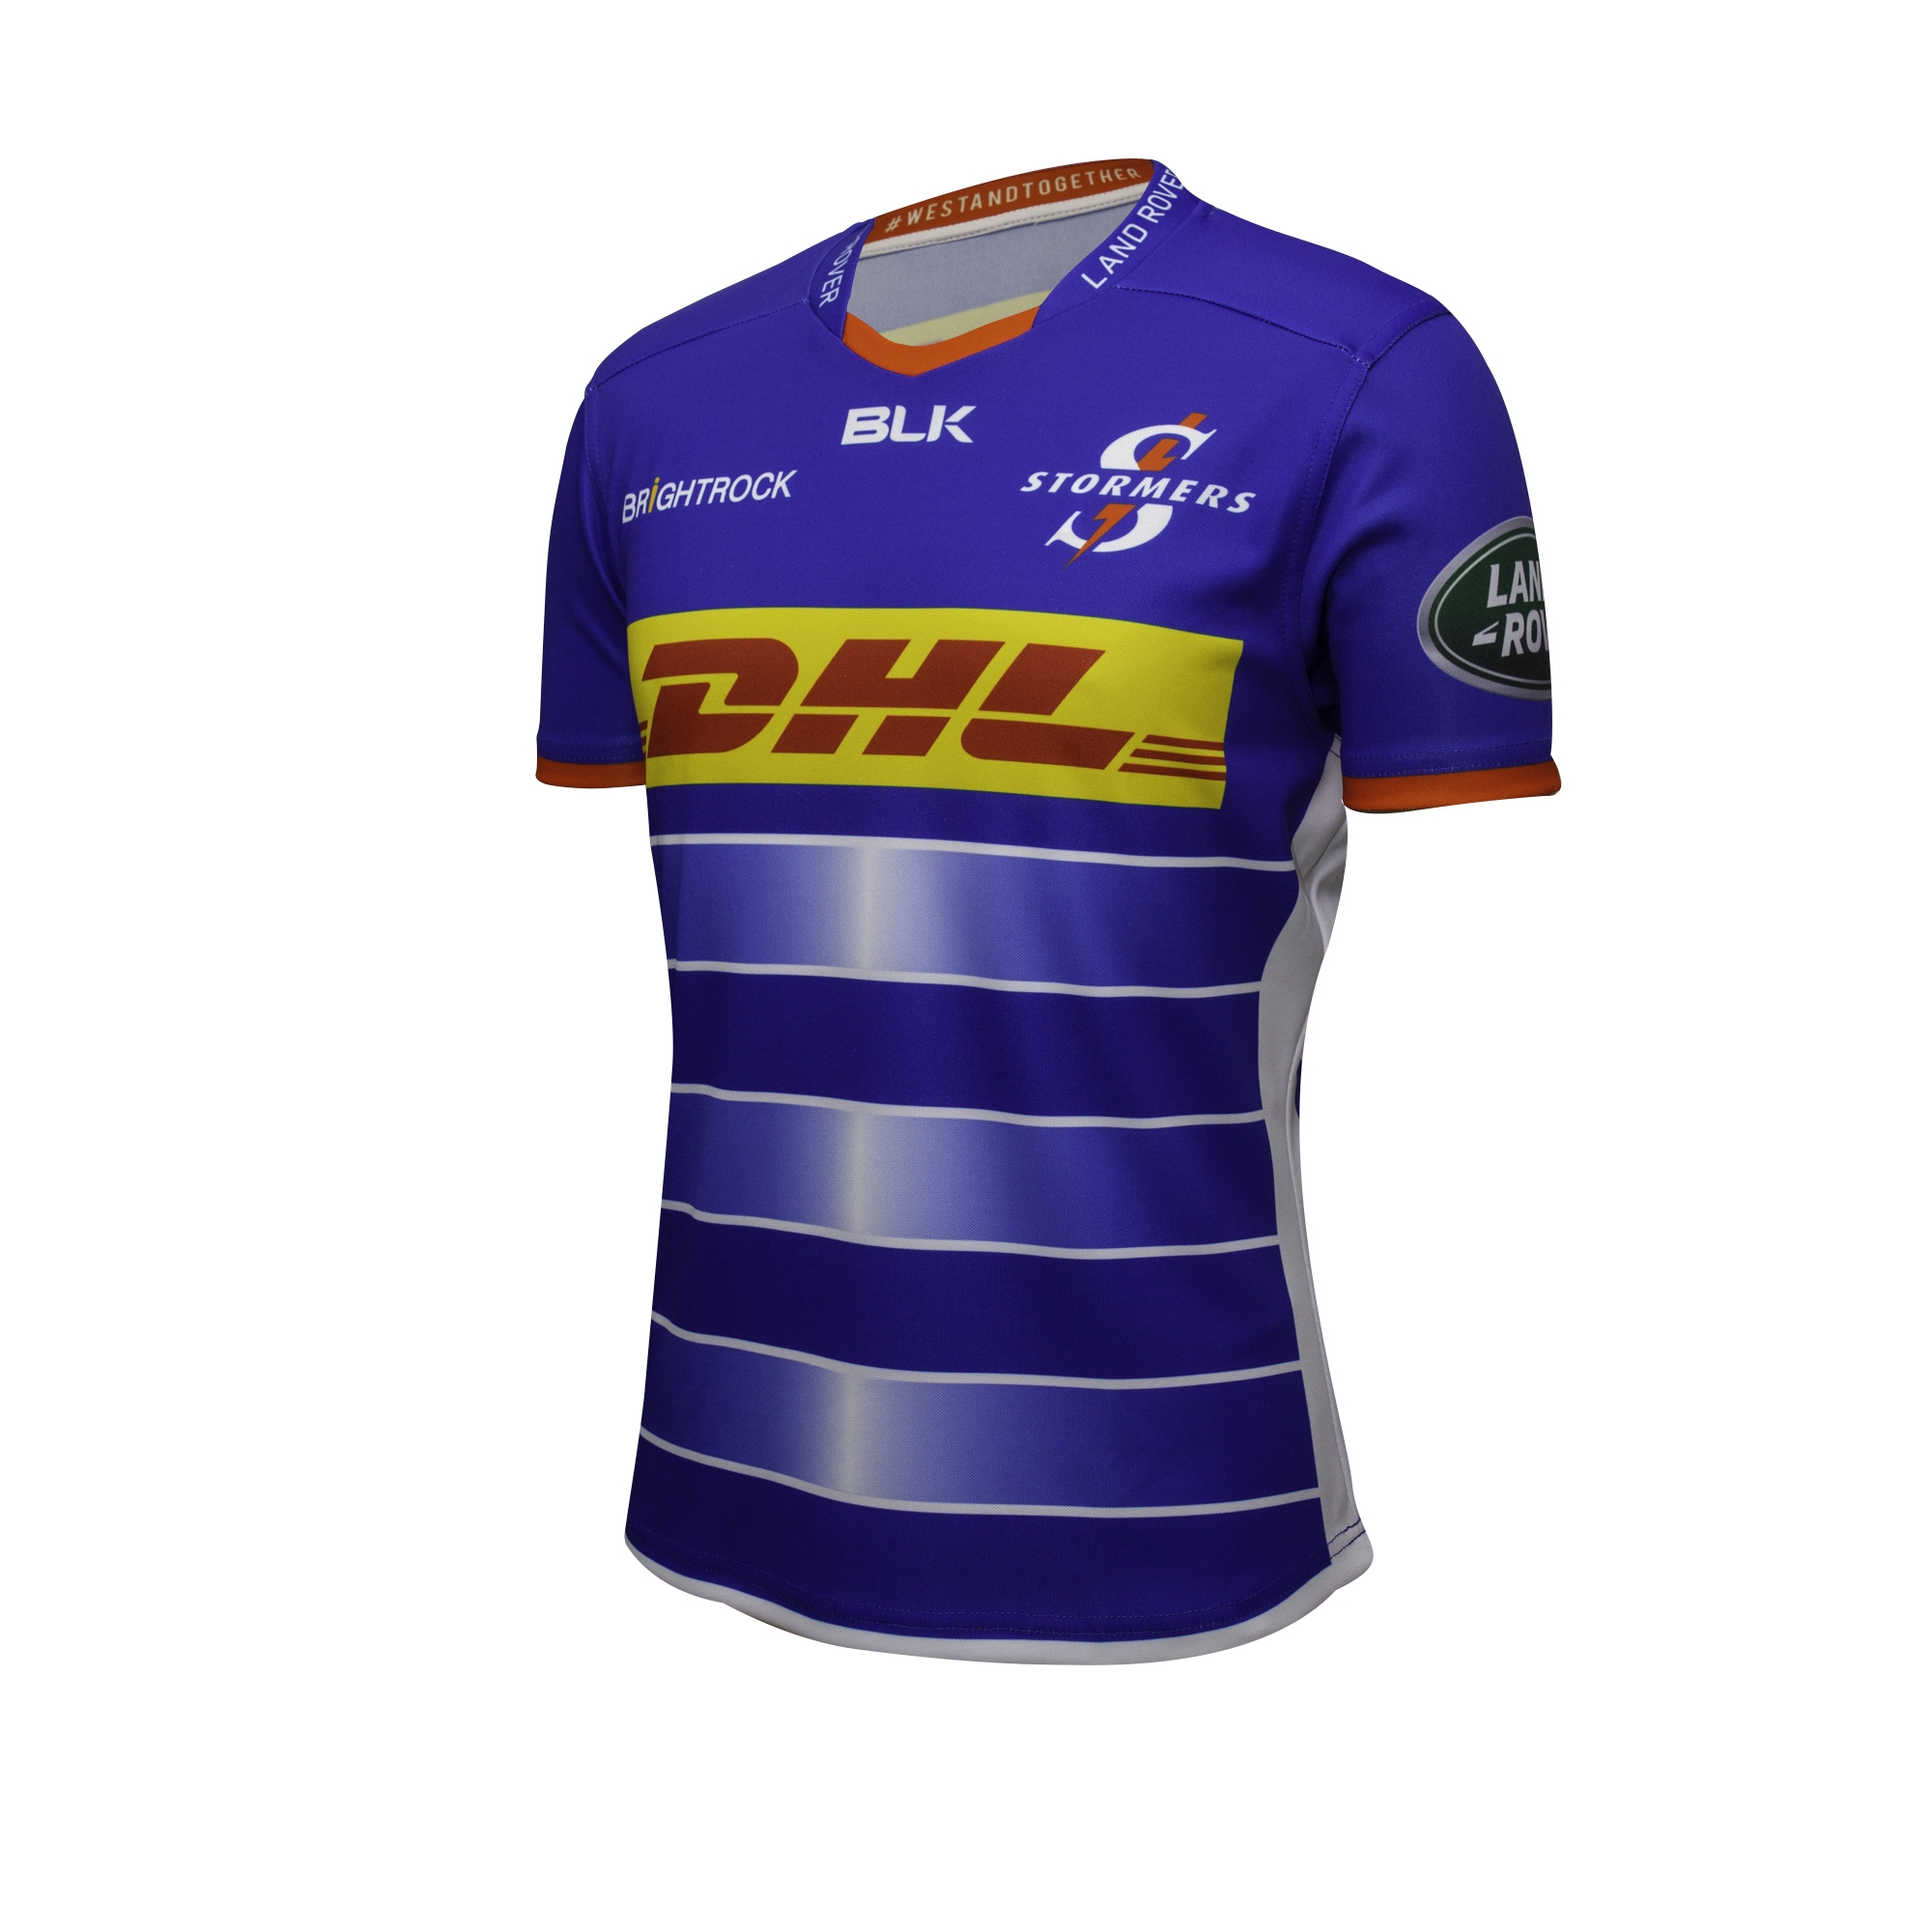 stormers marvel jersey 2020